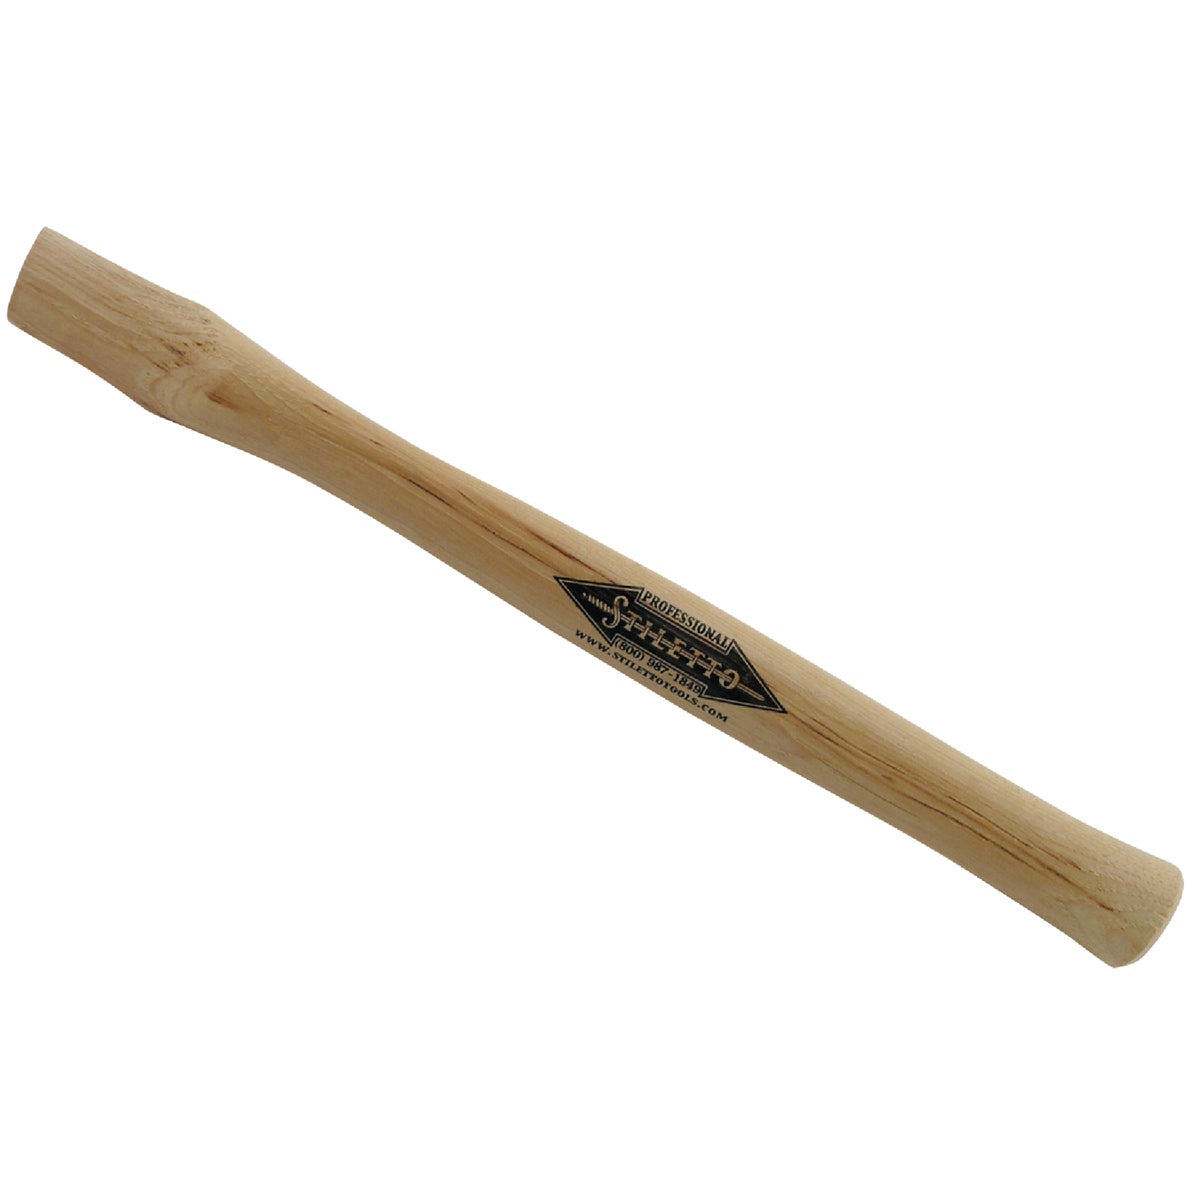 Item 344924, 18 In. hickory reverse axe-eye replacement handle which fits 12 and 14 Oz.